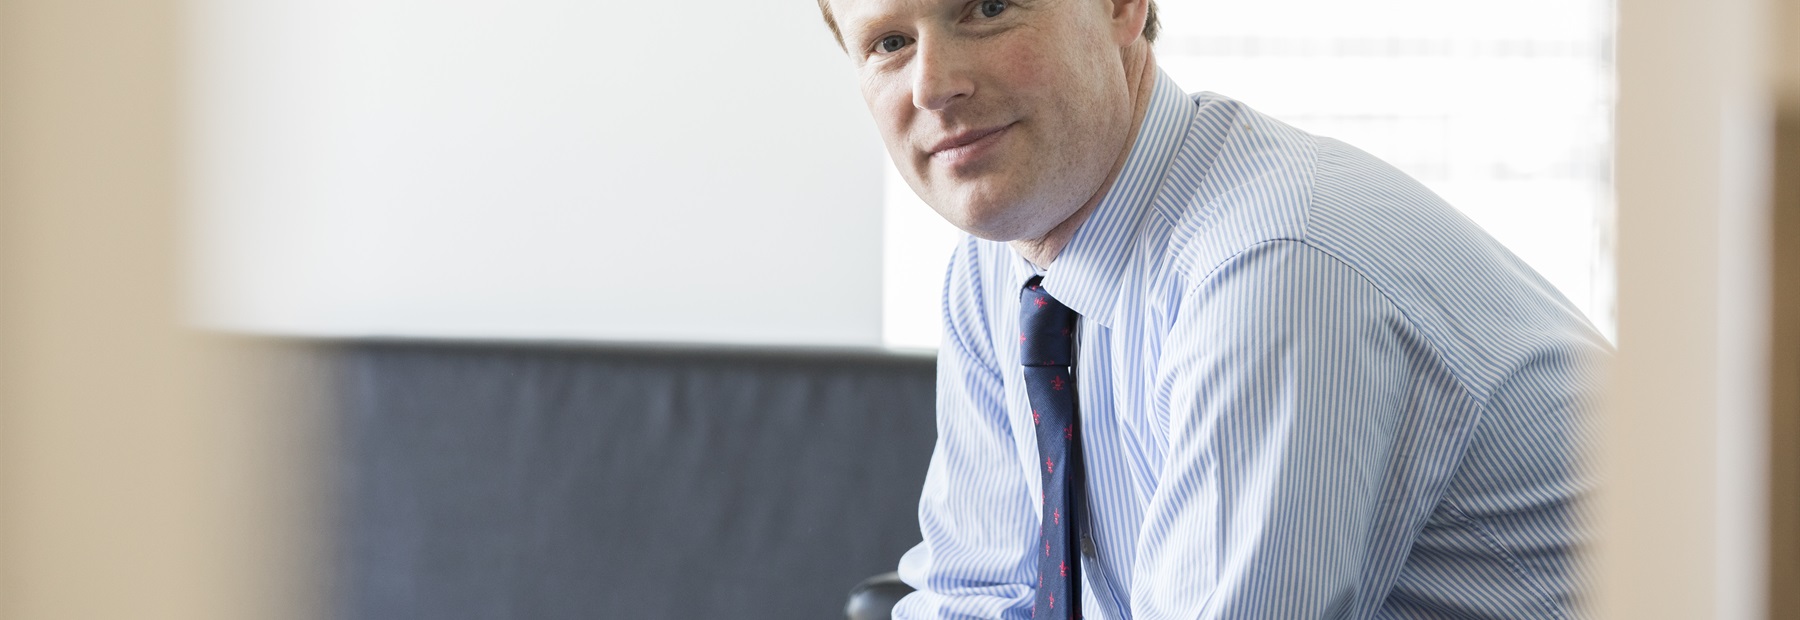 An image of Oliver Morley who is the Chief Executive Officer at the Pension Protection Fund 